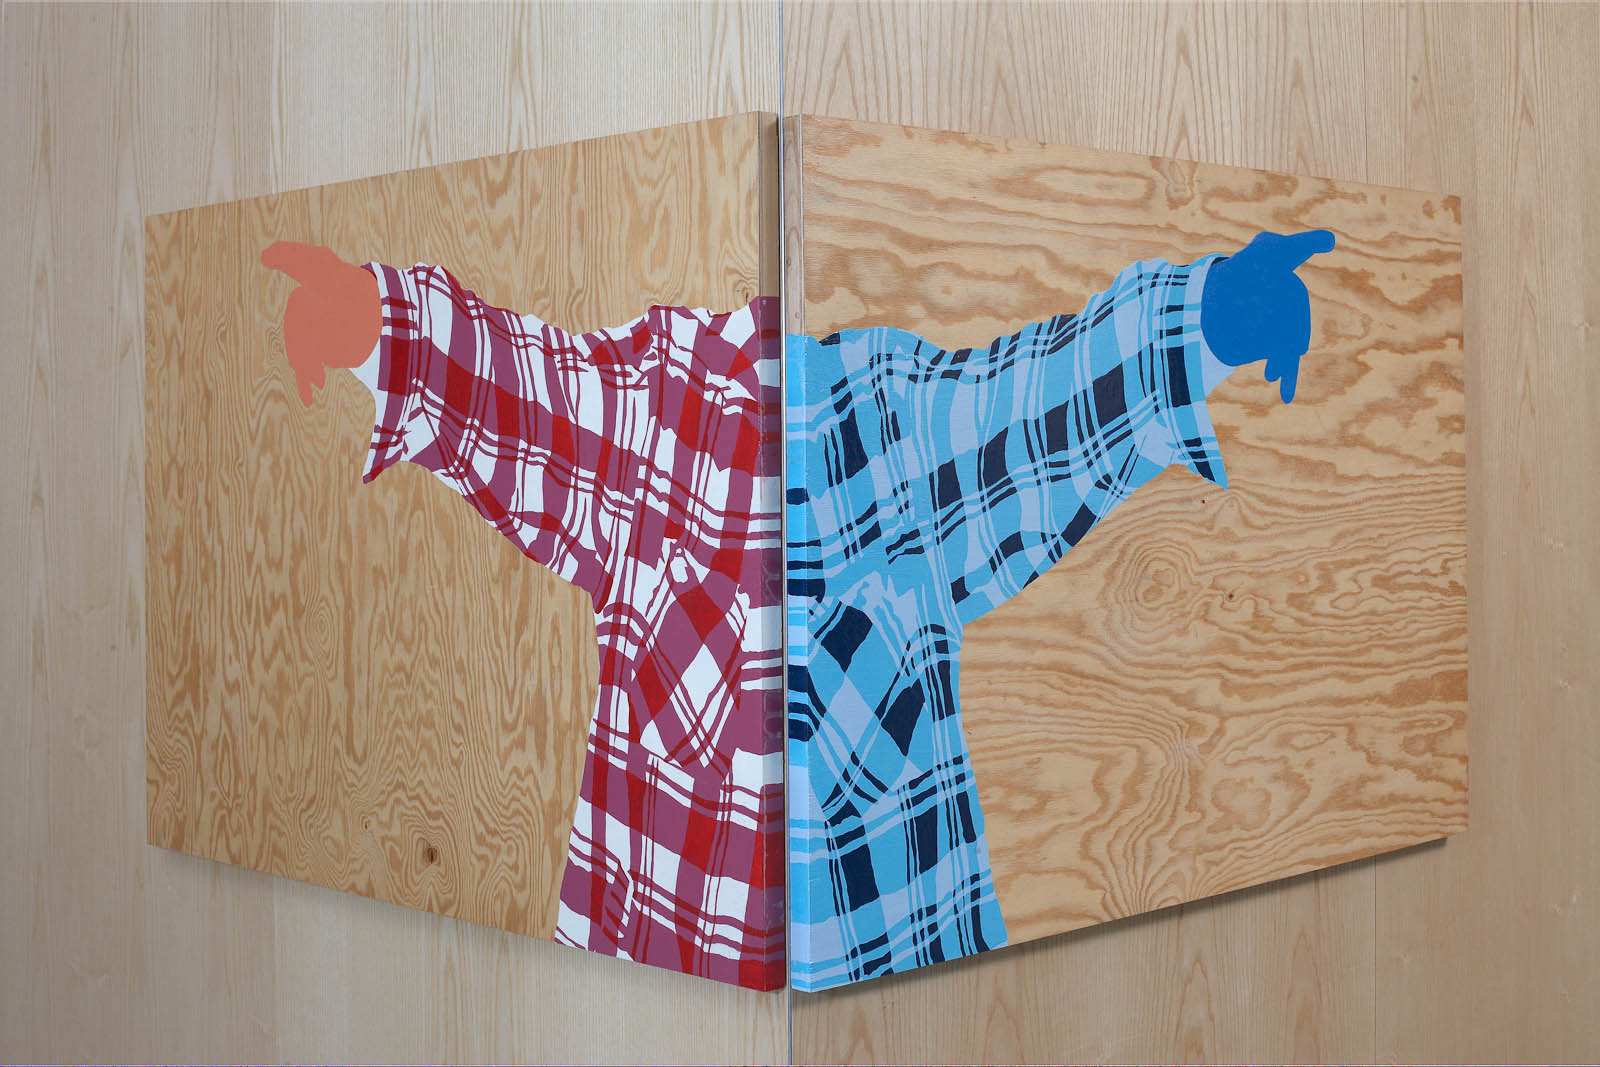 Two painting of a single shirt on woodenpanel on each side of a corner, facing eachother, thus comprising one single painting and one single shirt. Robert Lucander, paintings.